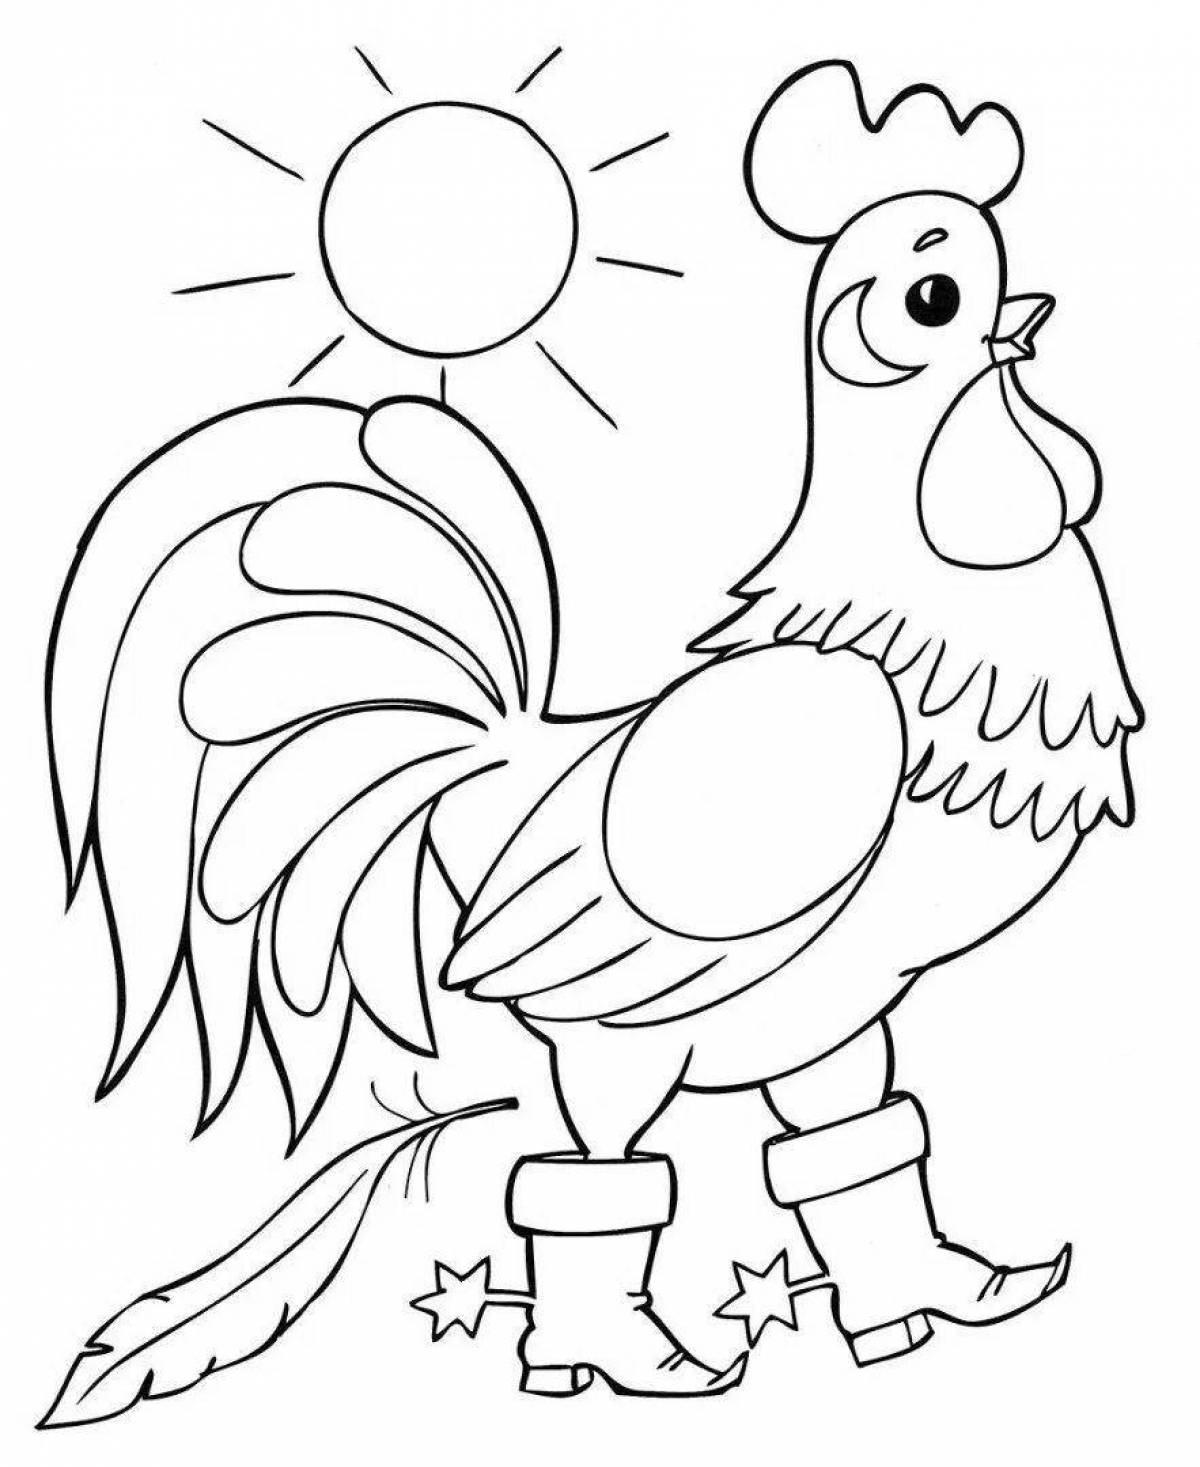 Coloring page joyful rooster